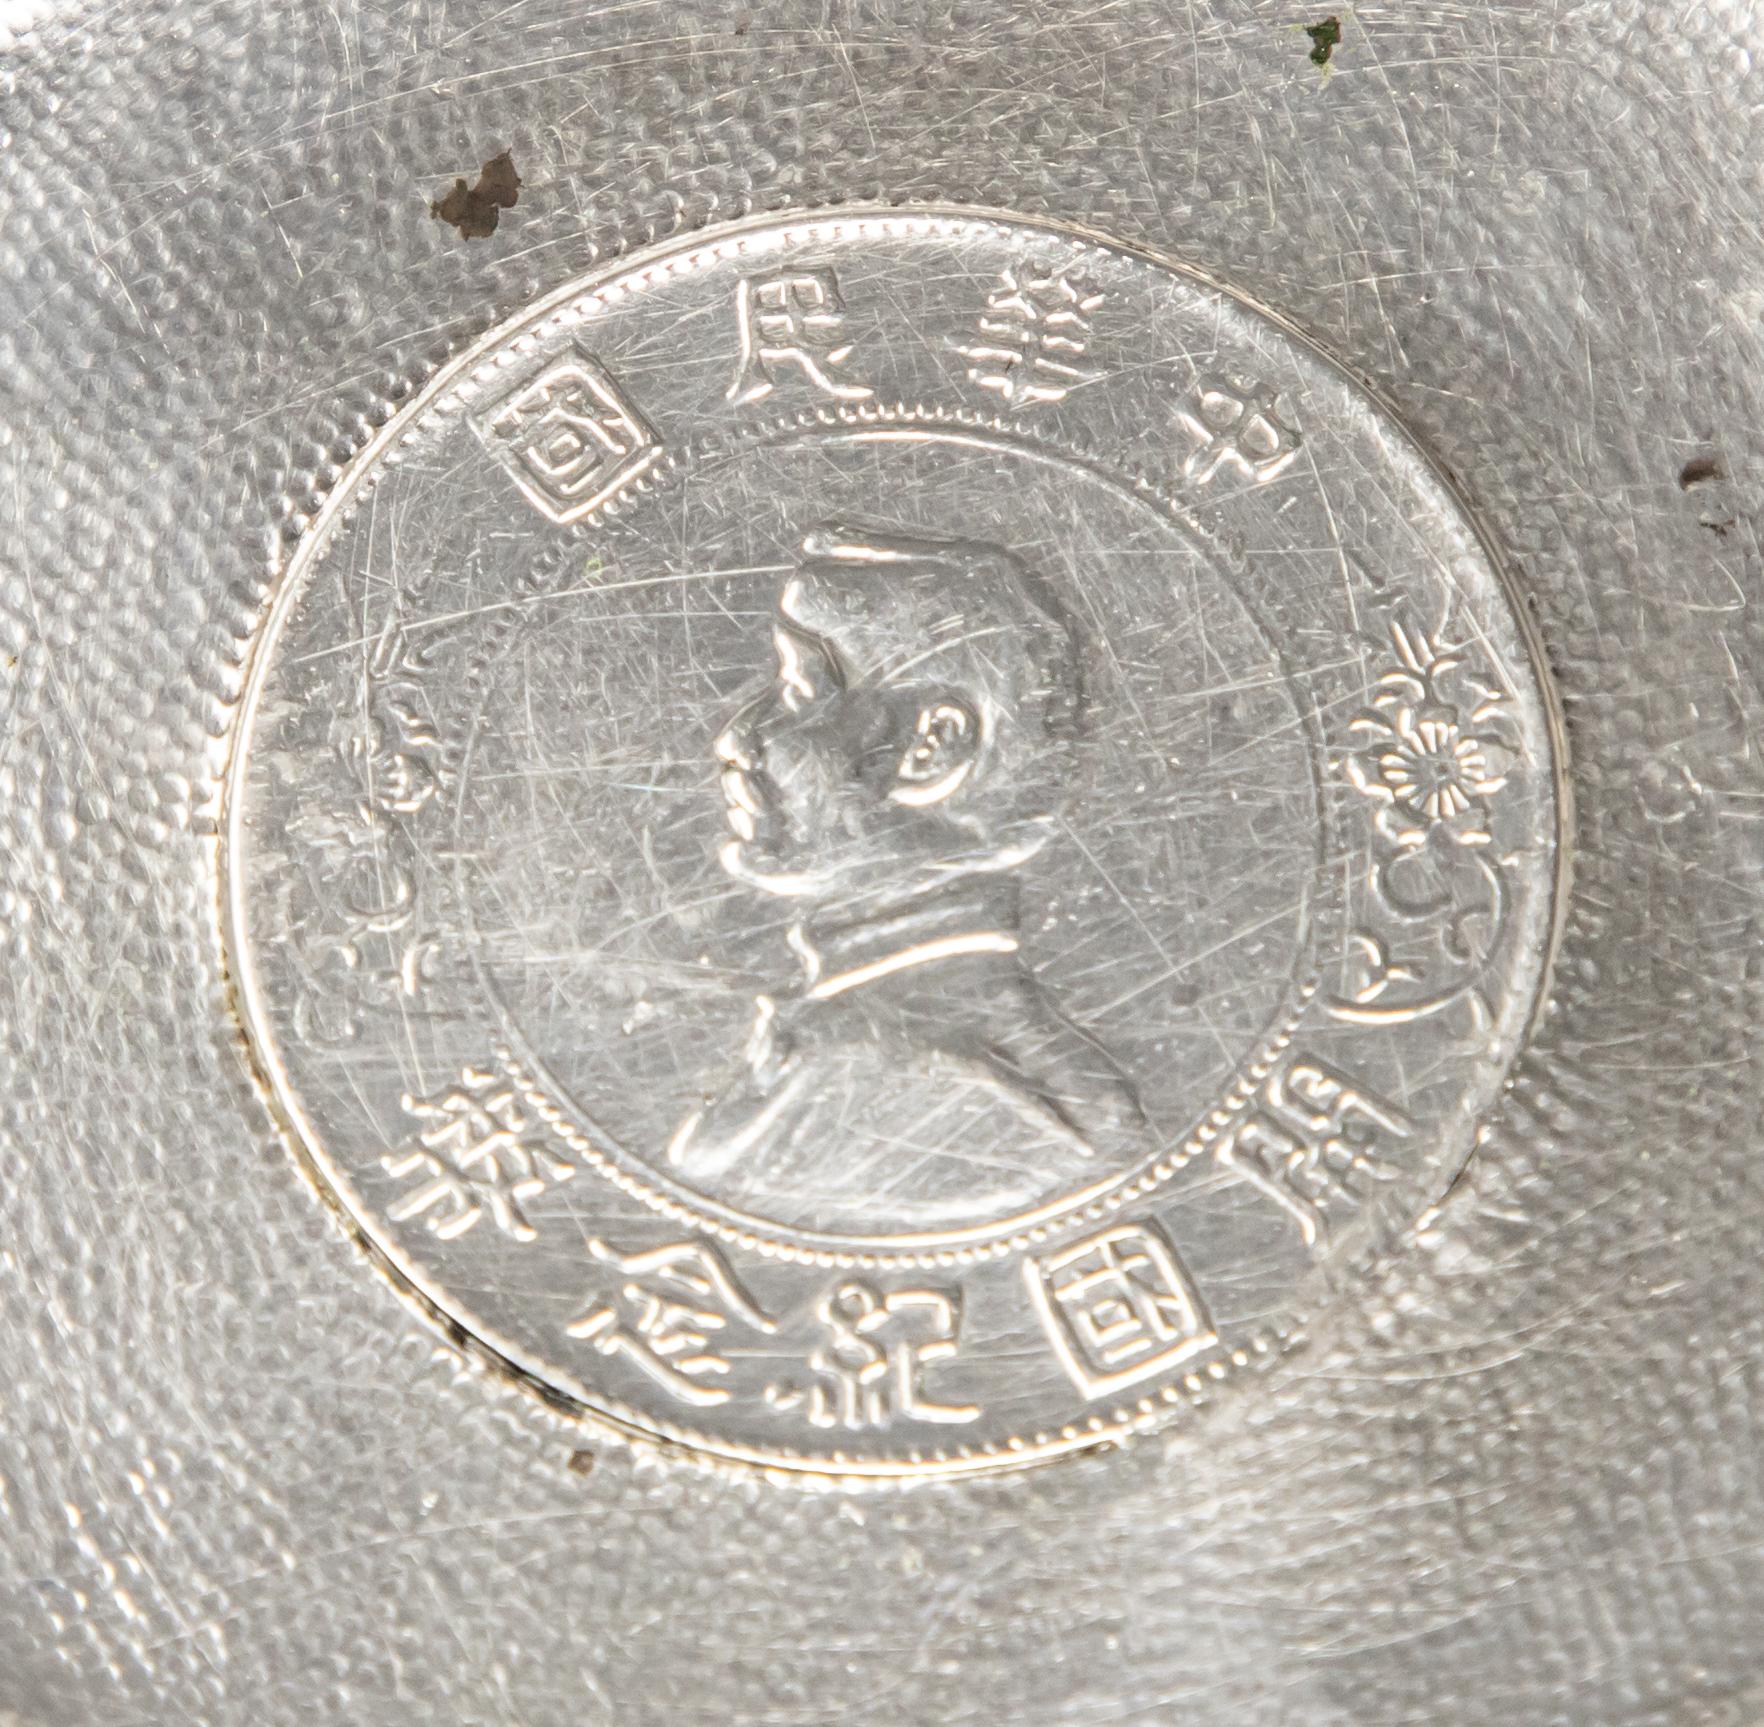 Offering this sterling silver Tuck Chang coin dish. The back is marked with Tuck Chang and their hallmark. The coin is Birth of the Republic of China.